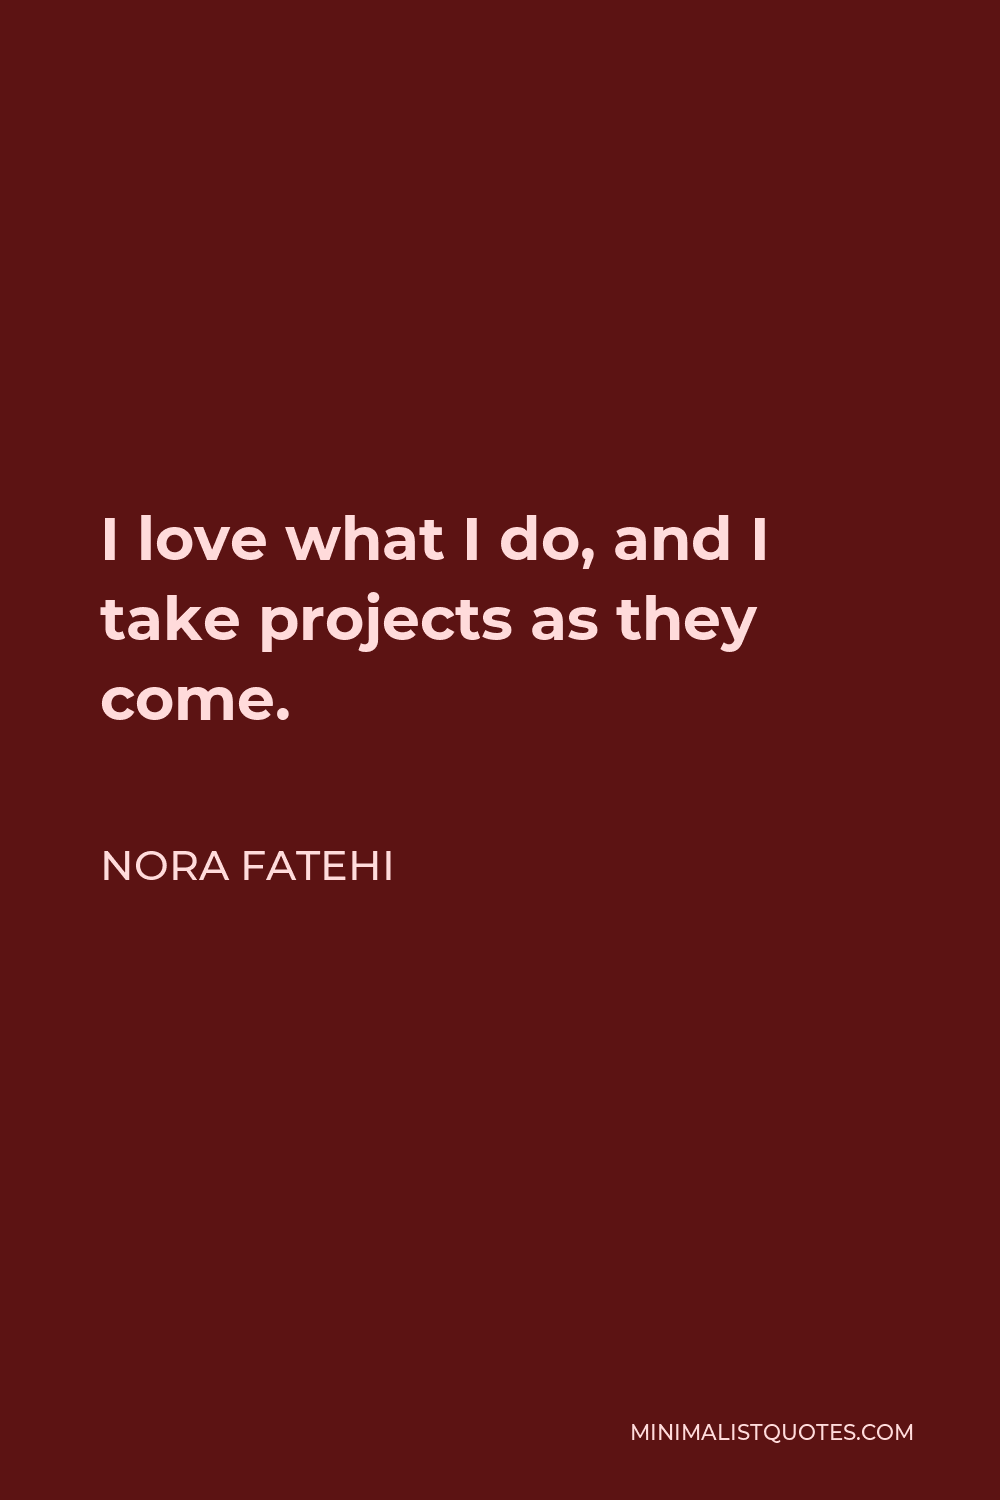 Nora Fatehi Quote - I love what I do, and I take projects as they come.